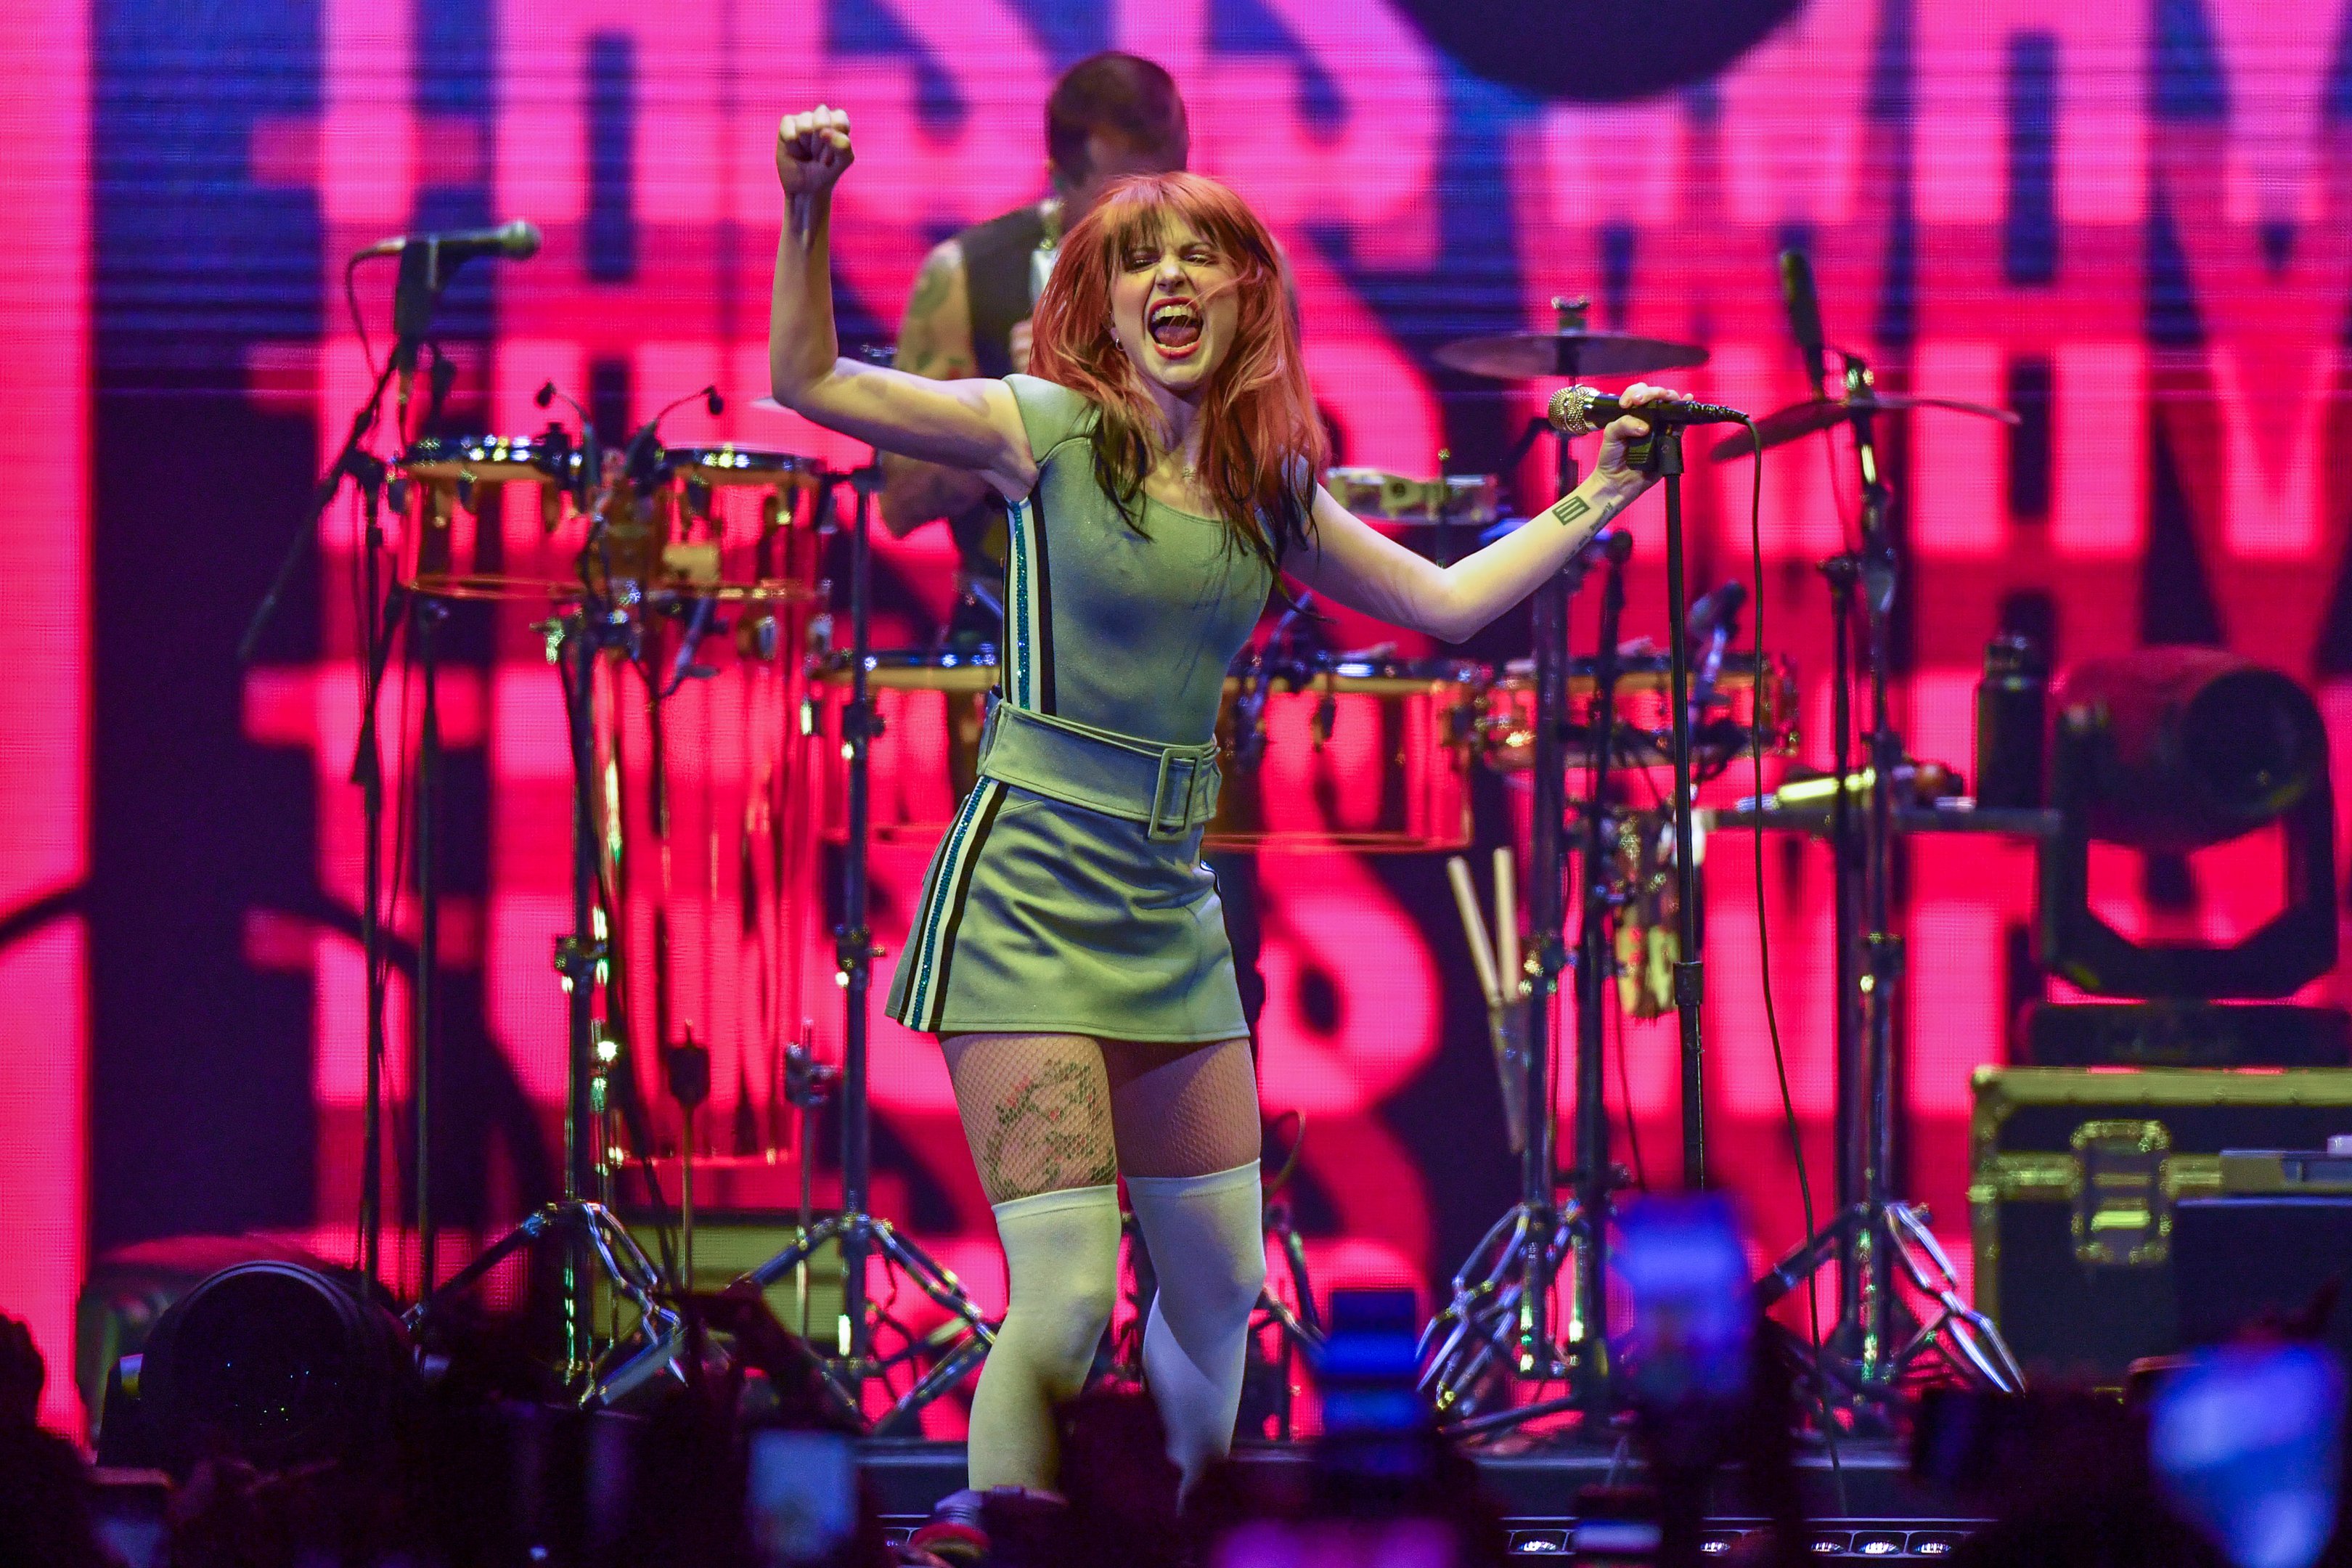 PHOENIX, ARIZONA - FEBRUARY 09: Hayley Williams of the group Paramore performs onstage during night one of the Bud Light Super Bowl Music Festival at Footprint Center on February 09, 2023 in Phoenix, Arizona. (Photo by Aaron J. Thornton/WireImage)